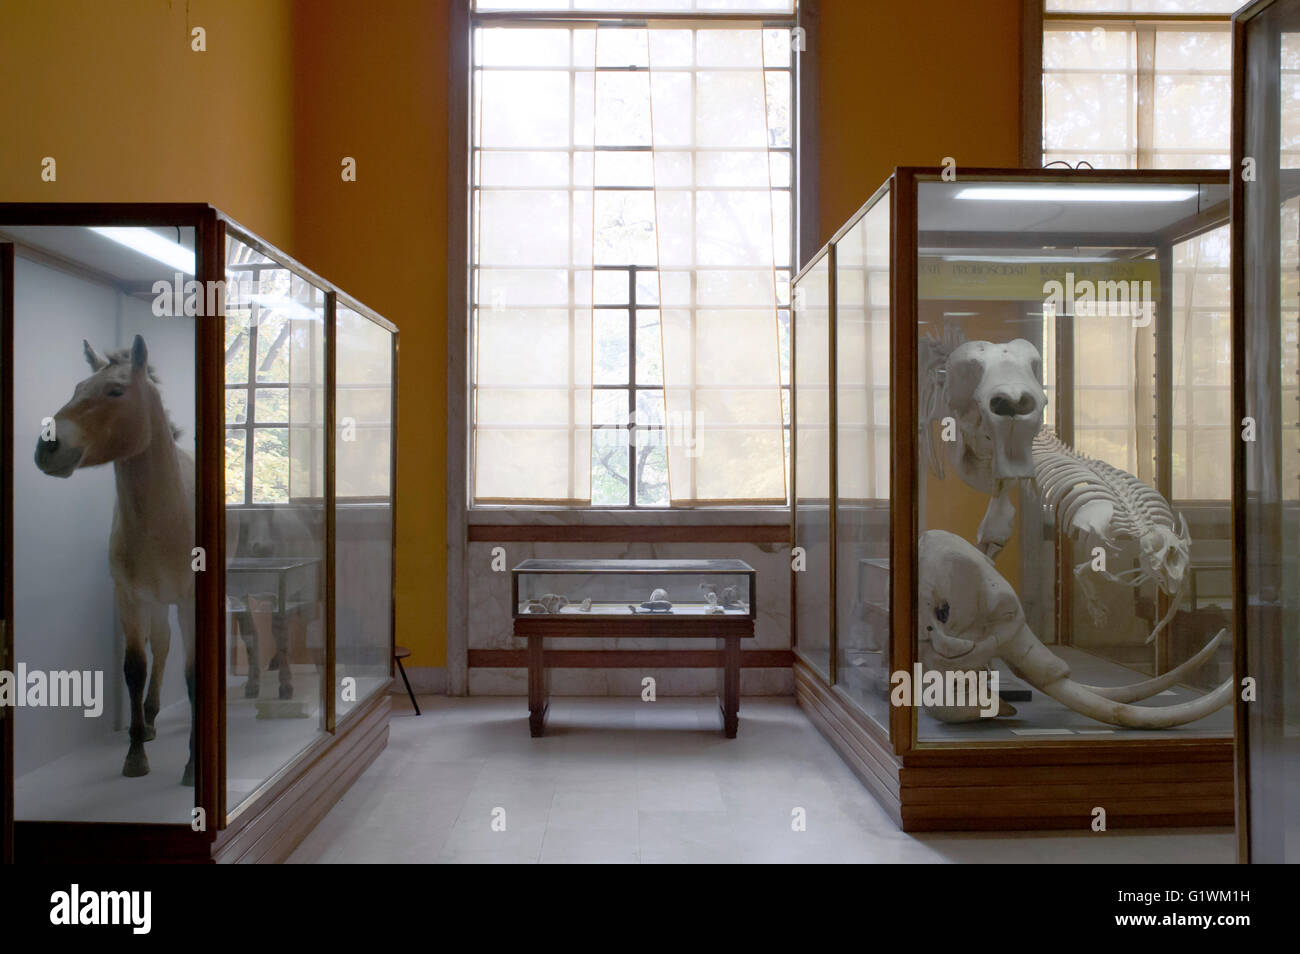 Natural museum history, stuffed animals in glass cases: donkey and animal bones Stock Photo